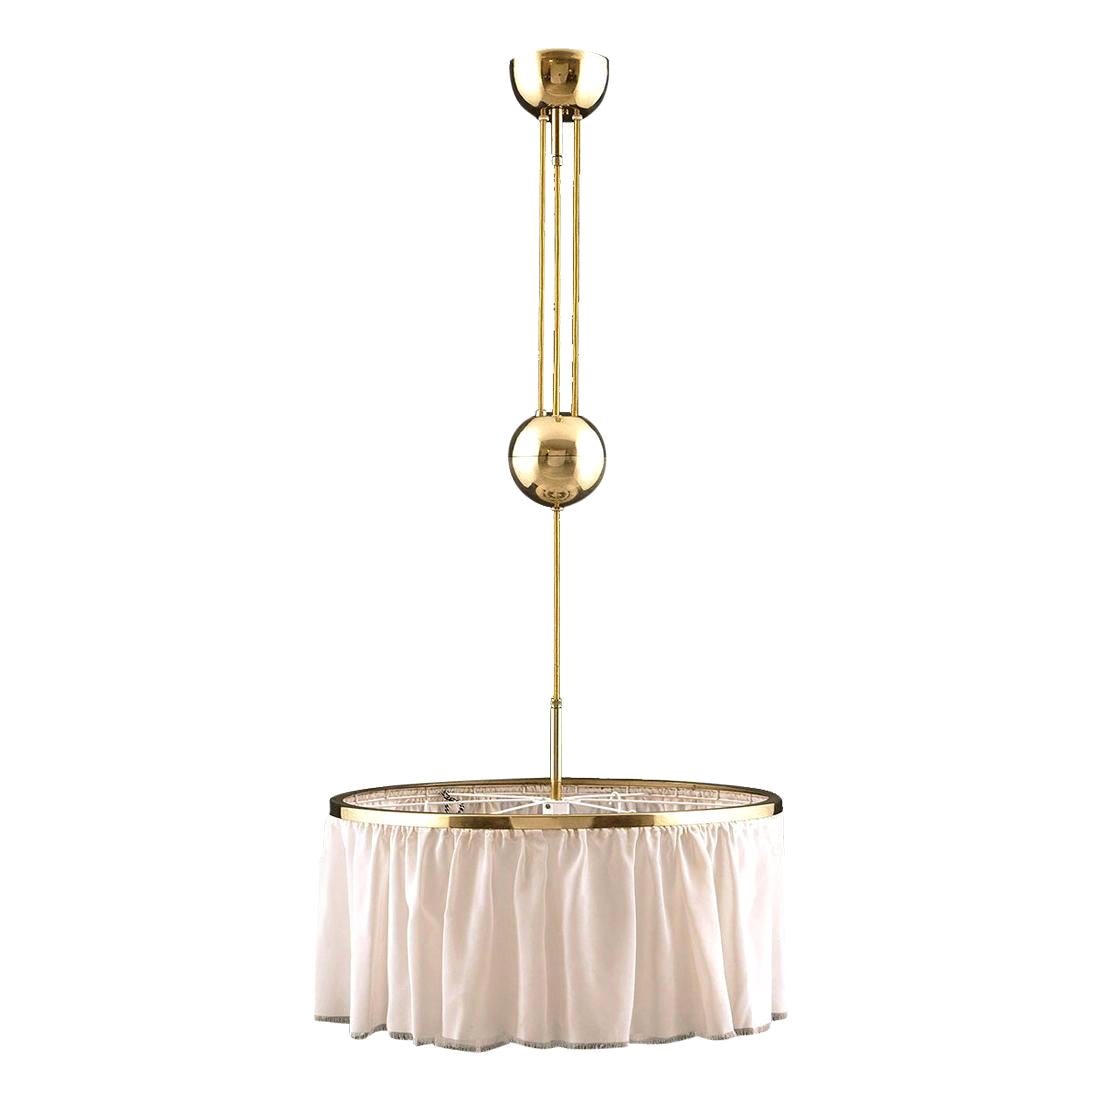 Adolf Loos Silk and Brass Pulley-Chandelier, Re-Edition For Sale